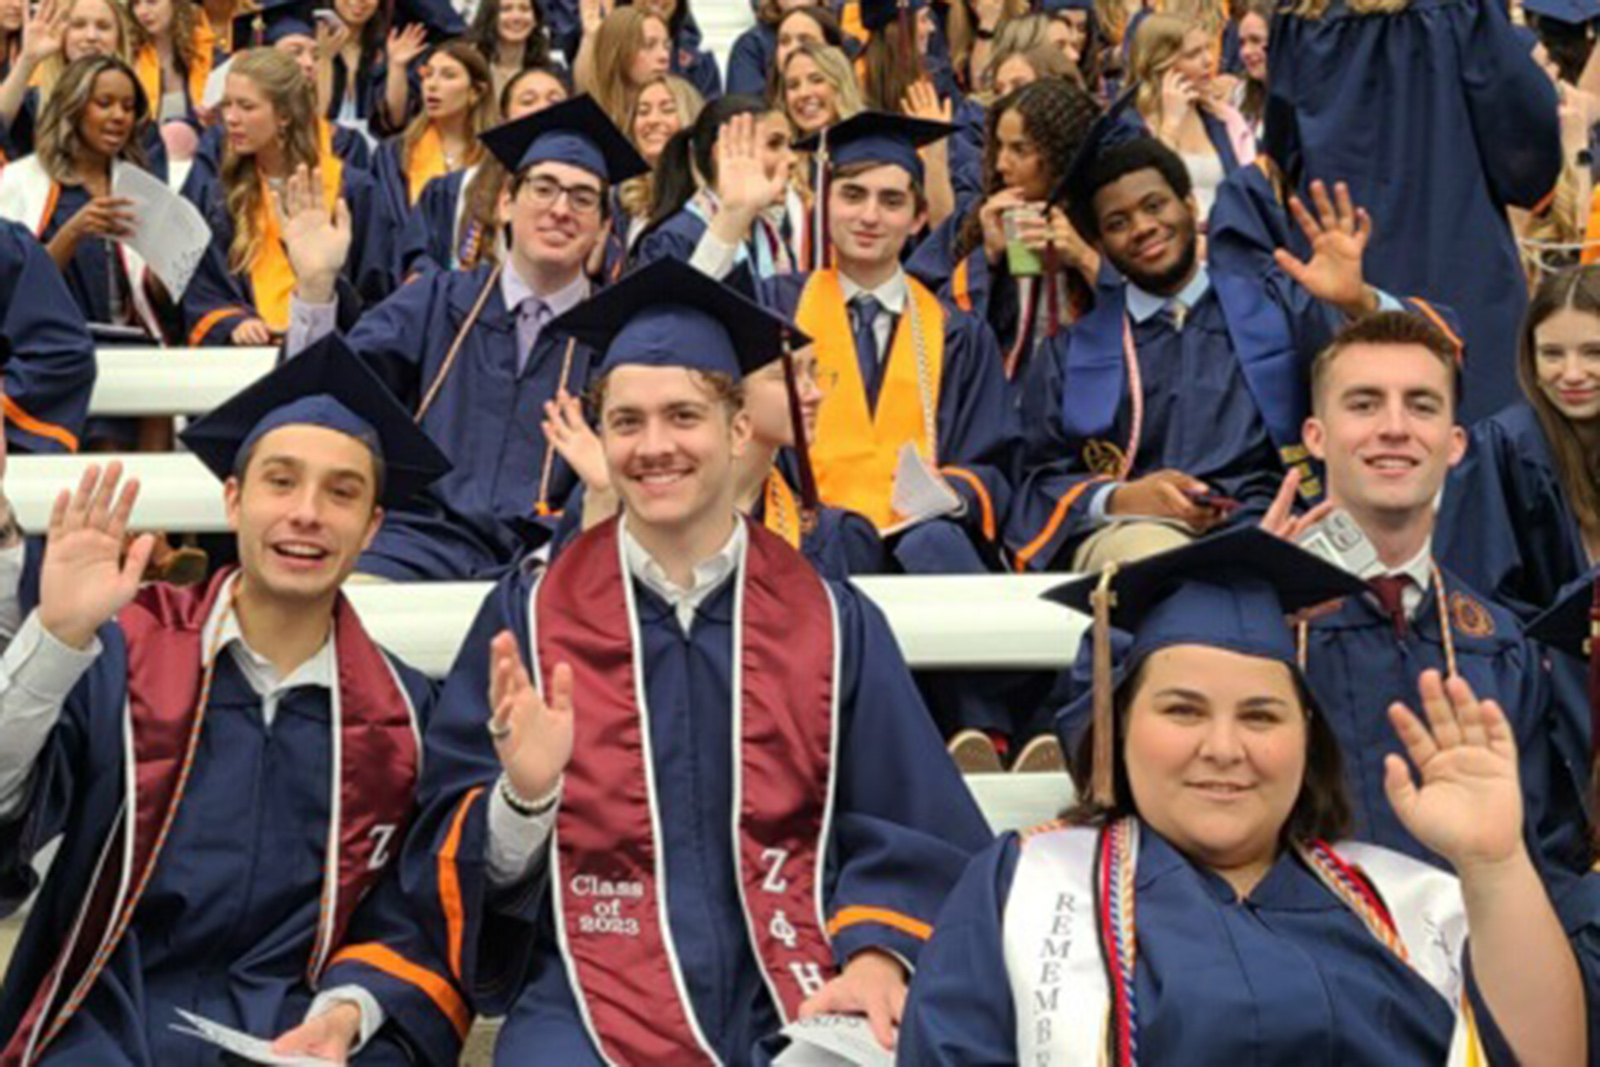 Students in academic regalia wave during a photo while sitting on bleachers